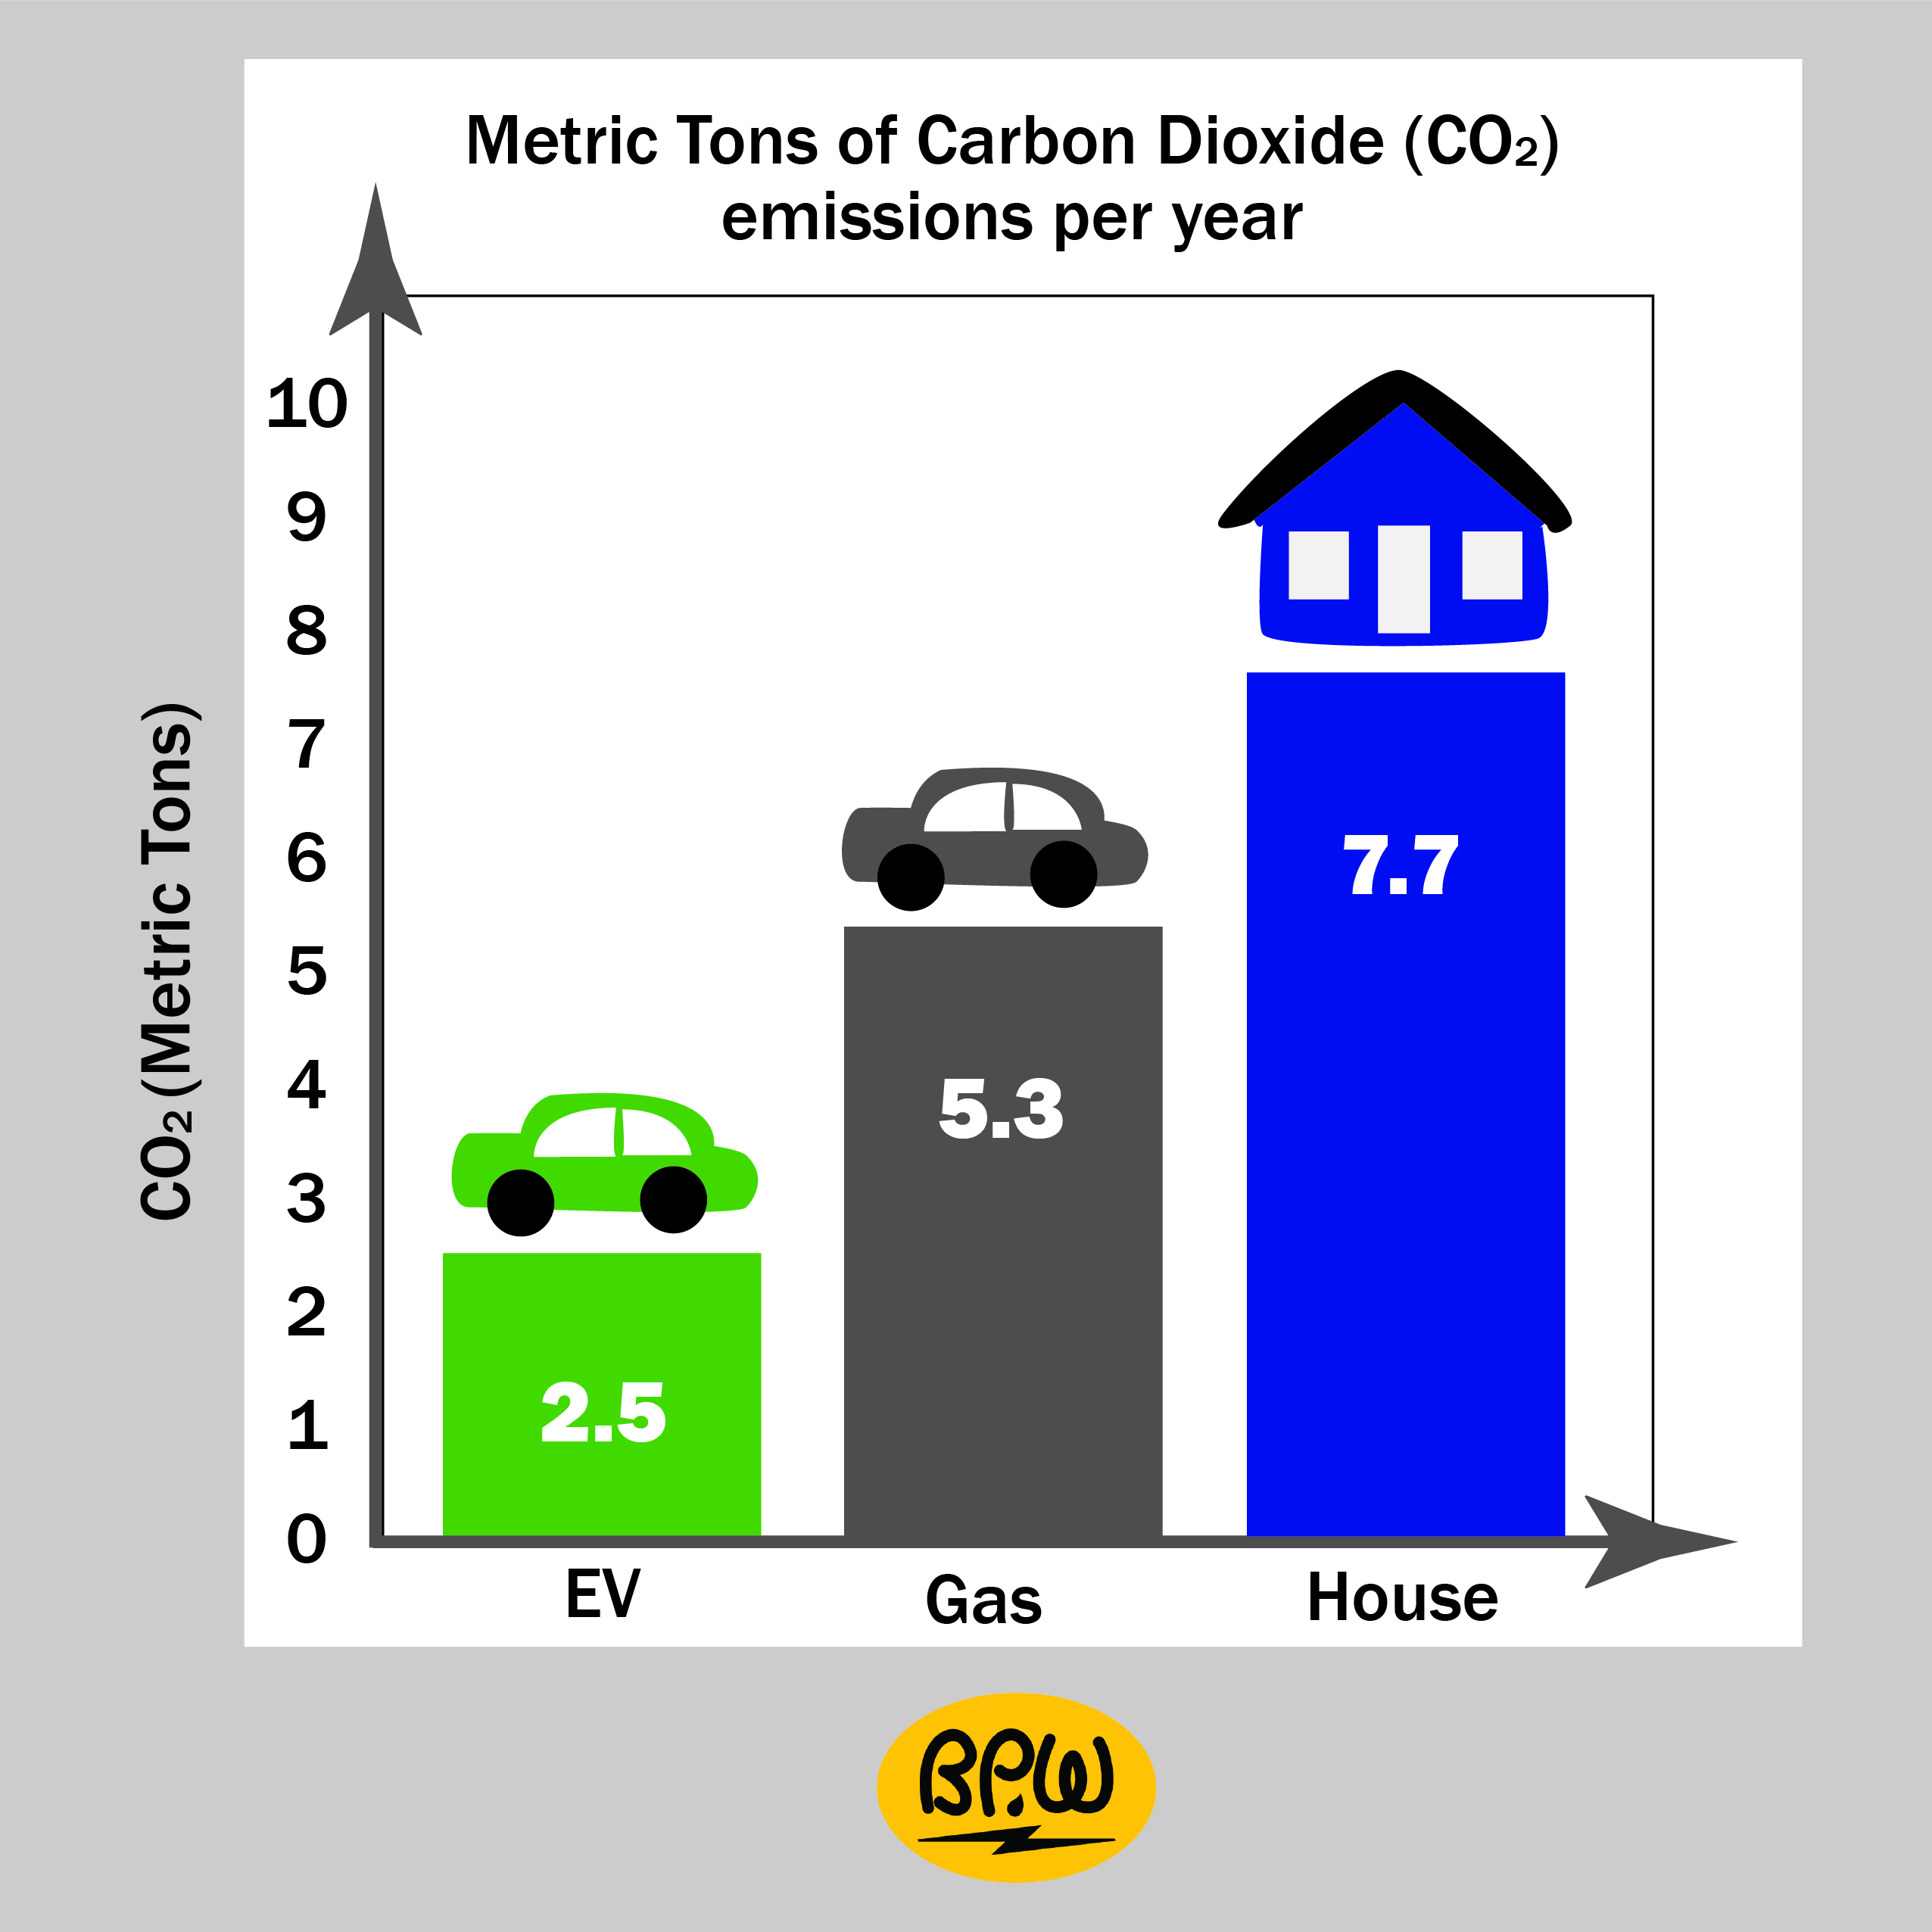 bar graph shows metric tons of co2 emissions per year: ev = 2.5, gas = 5.3, home = 7.7